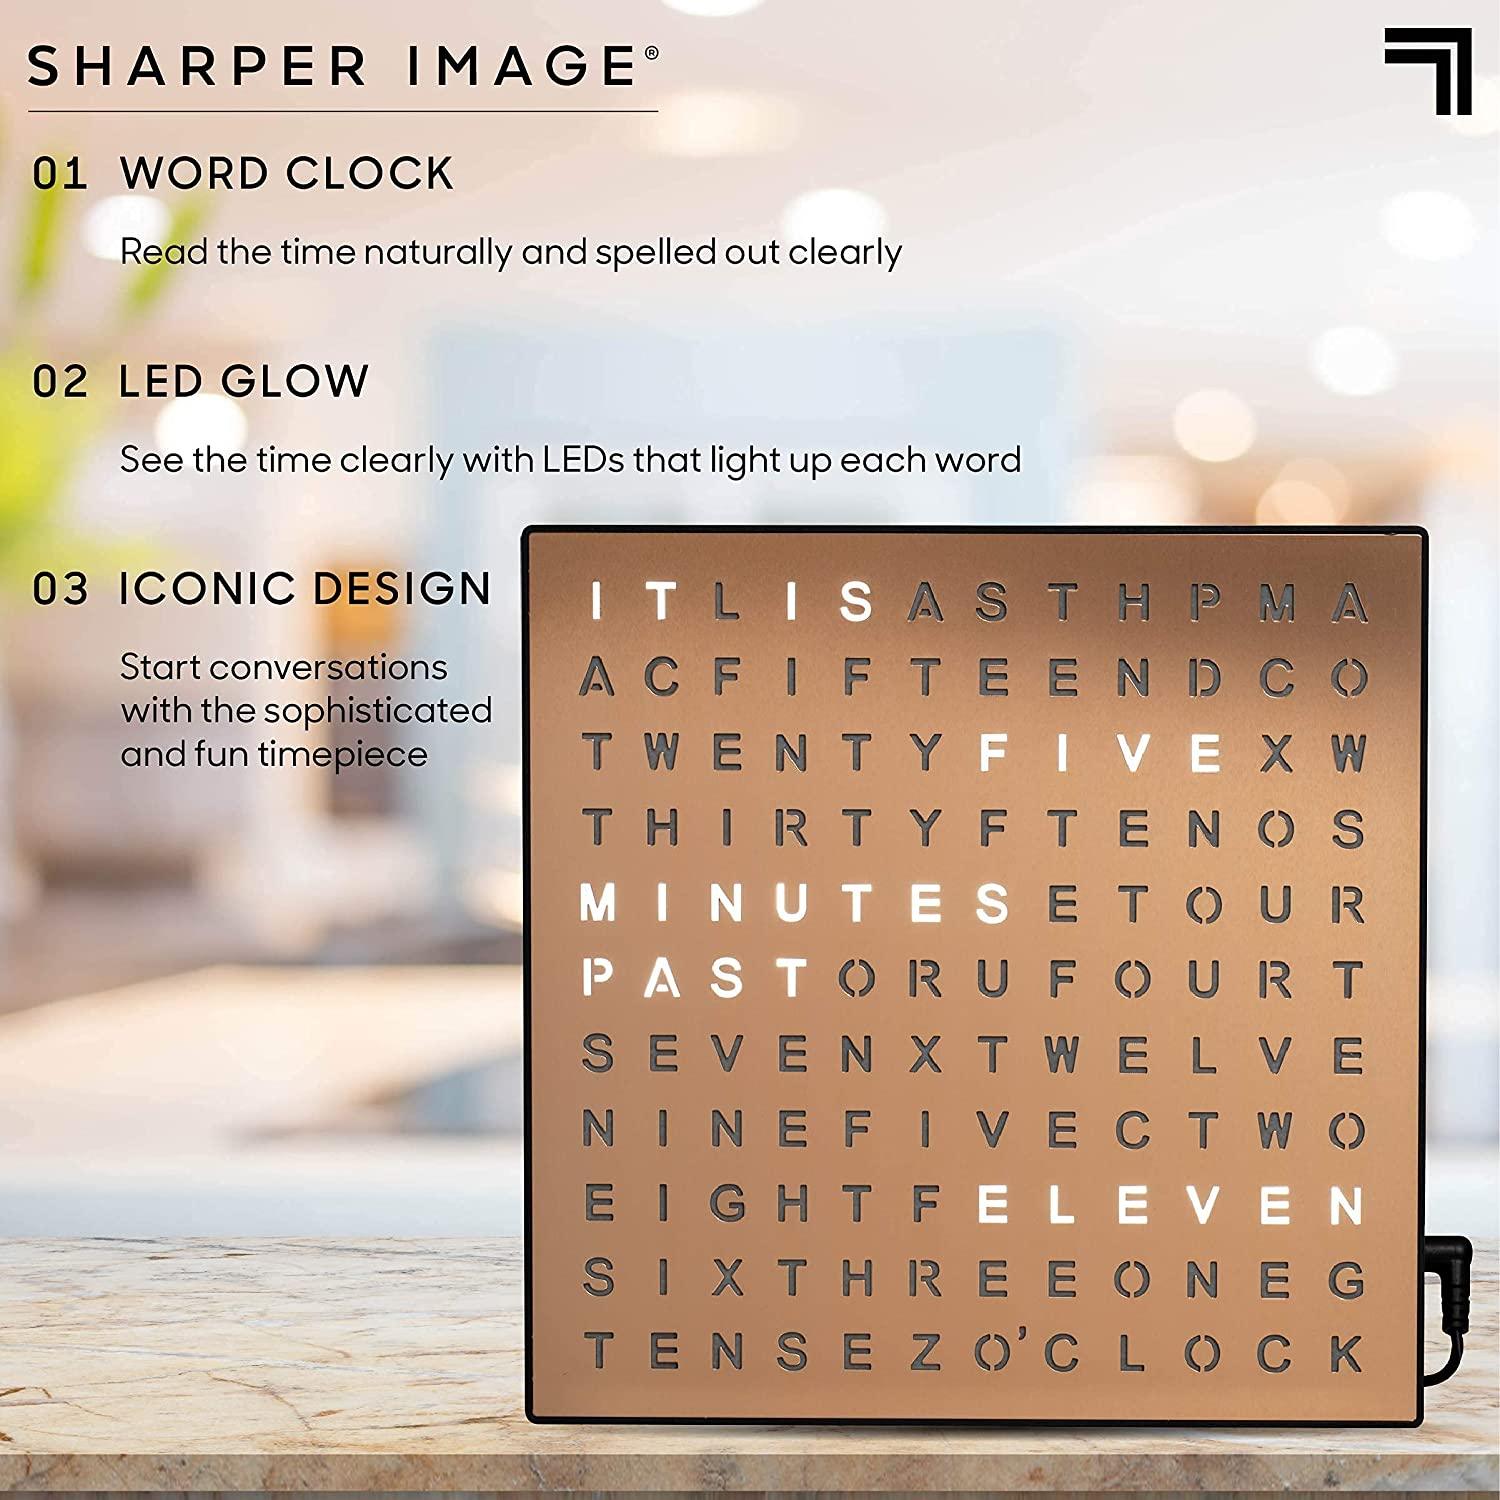 SHARPER IMAGE® LED Light-Up Word Clock, 7.75" Modern Design, Electronic Accent Wall or Desk Clock, USB Cord & Power Adapter, Unique Contemporary Home & Office Decor, Easy Setup, Housewarming Gift